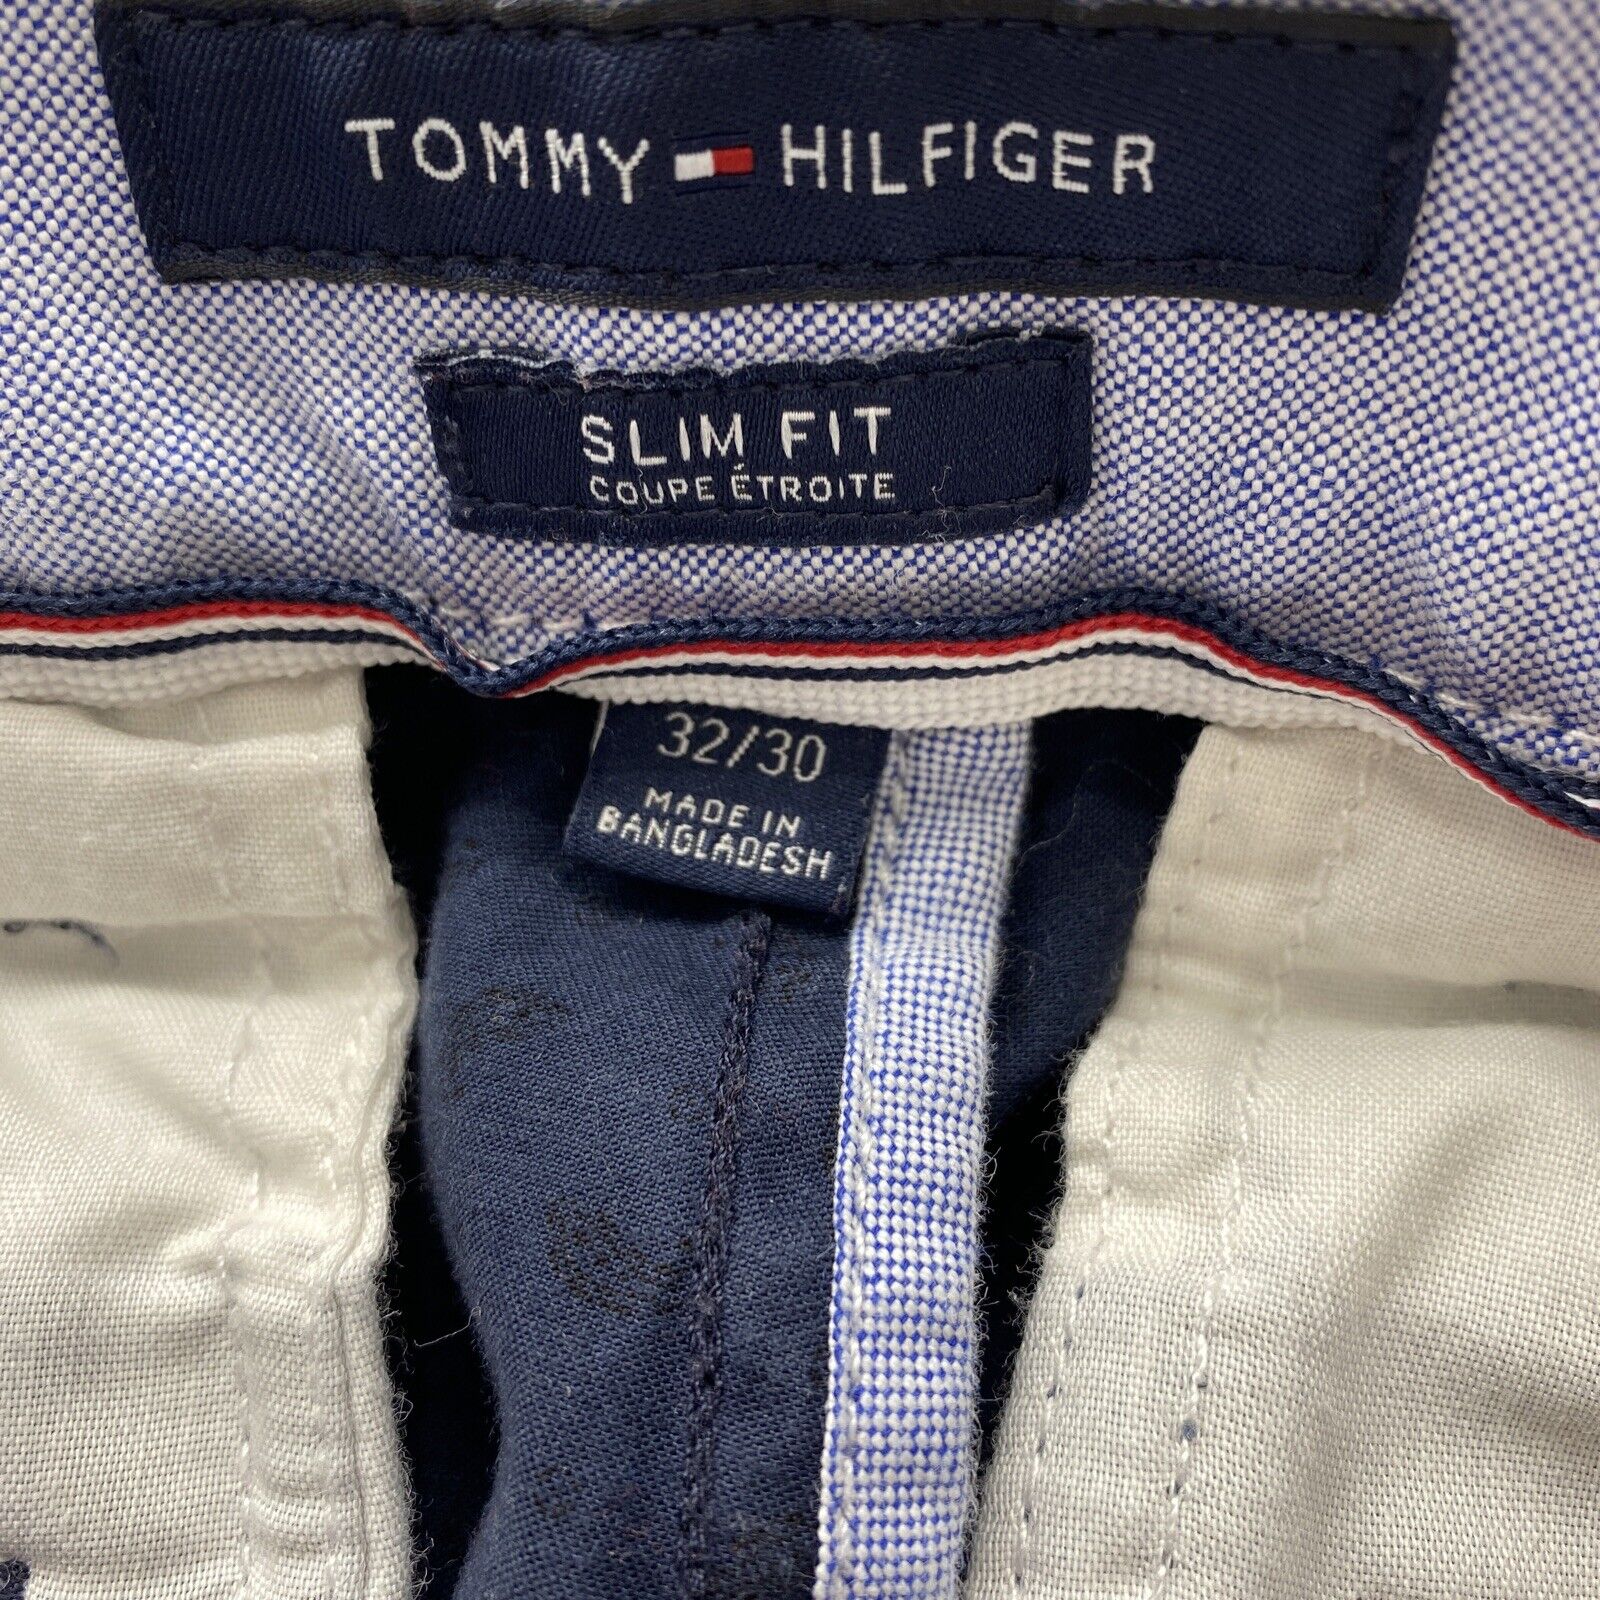 Tommy Hilfiger Navy Blue Slim Fit Coupe Etroite Pants Size 32X30 - beyond exchange